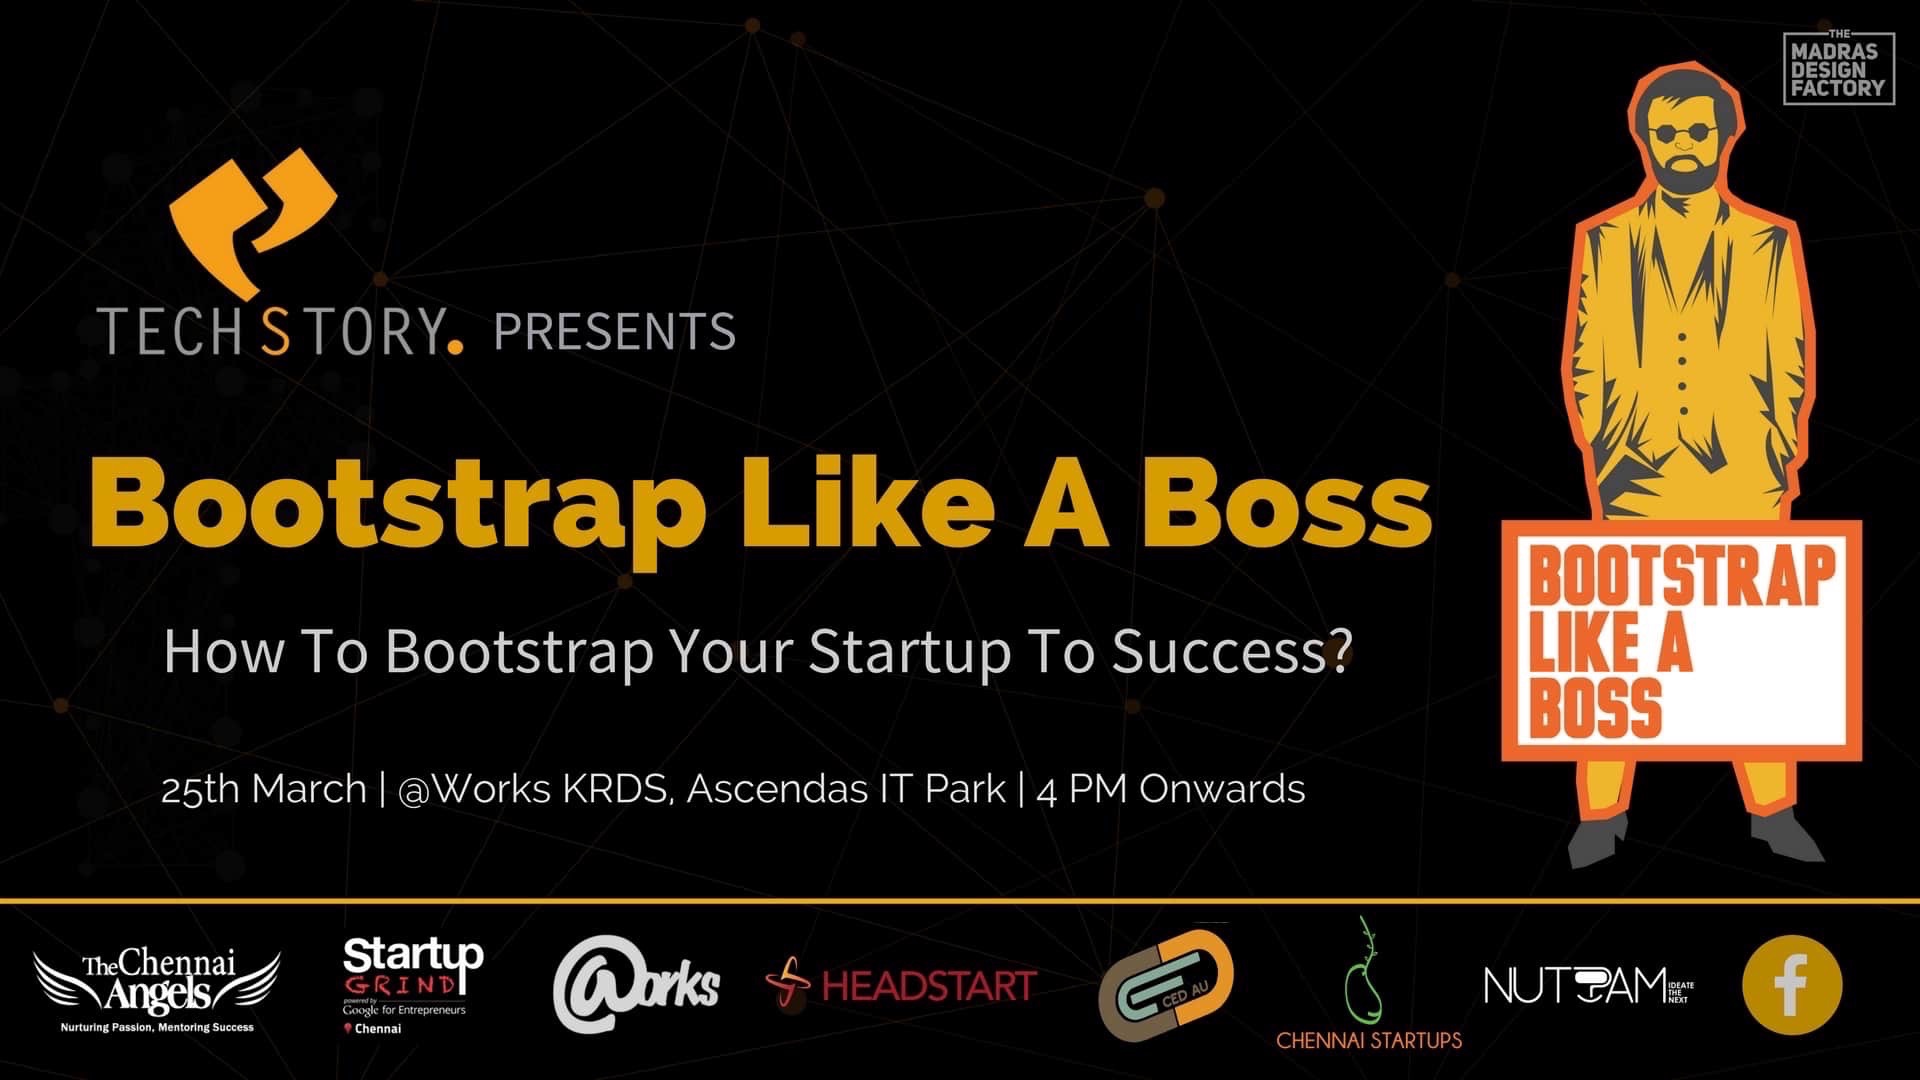 Our CEO explains How to Bootstrap like a Boss